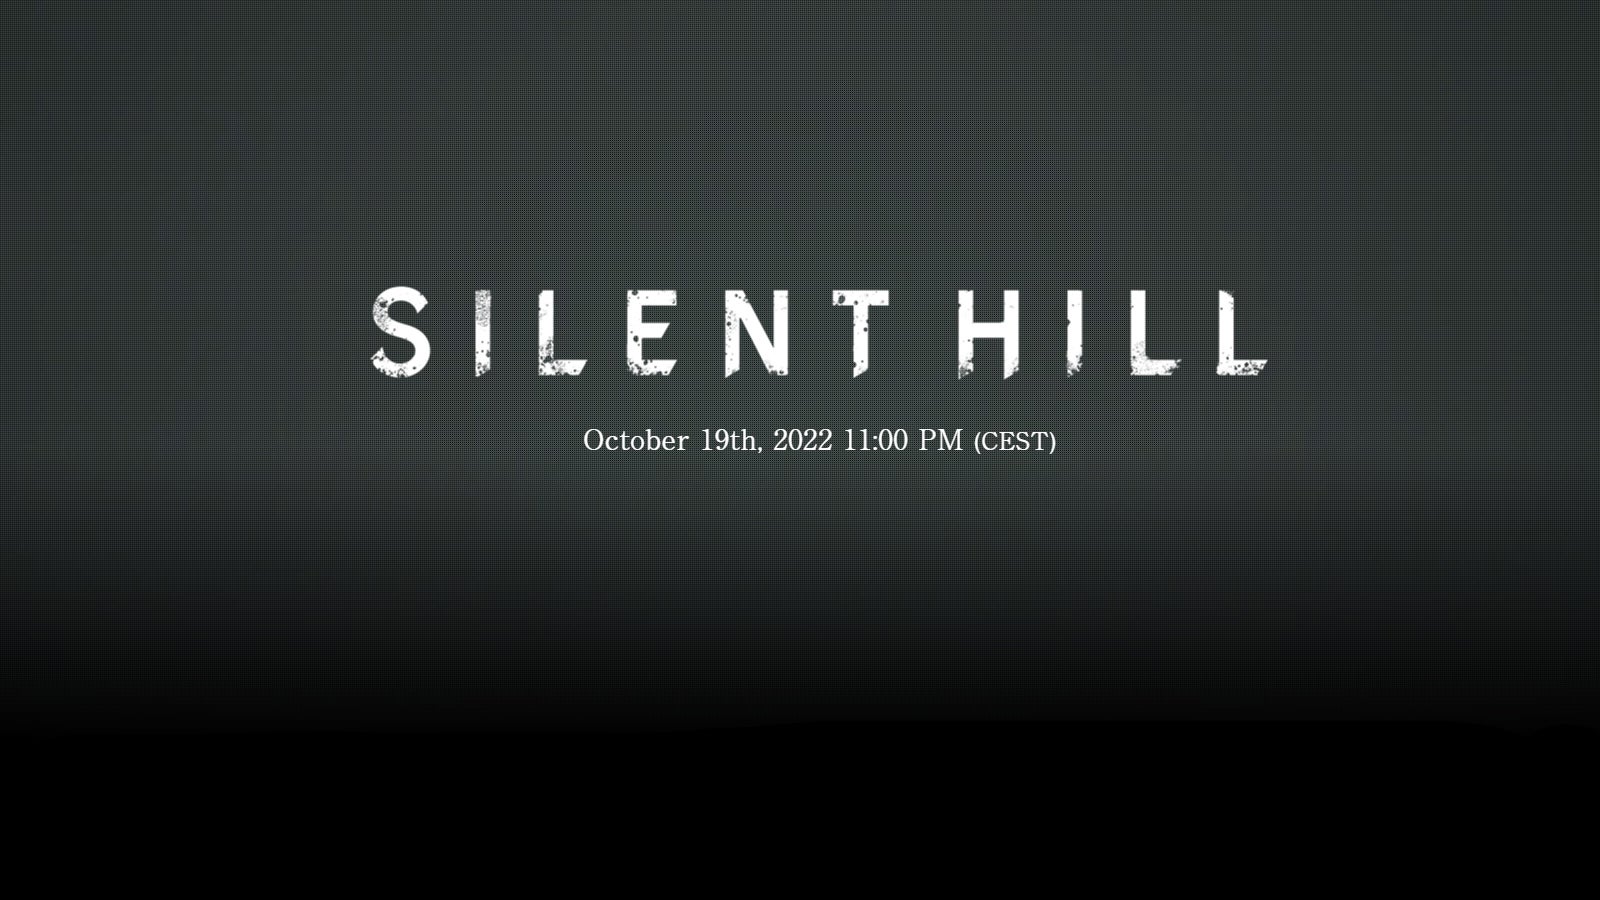 Image of the Silent Hill teaser site.